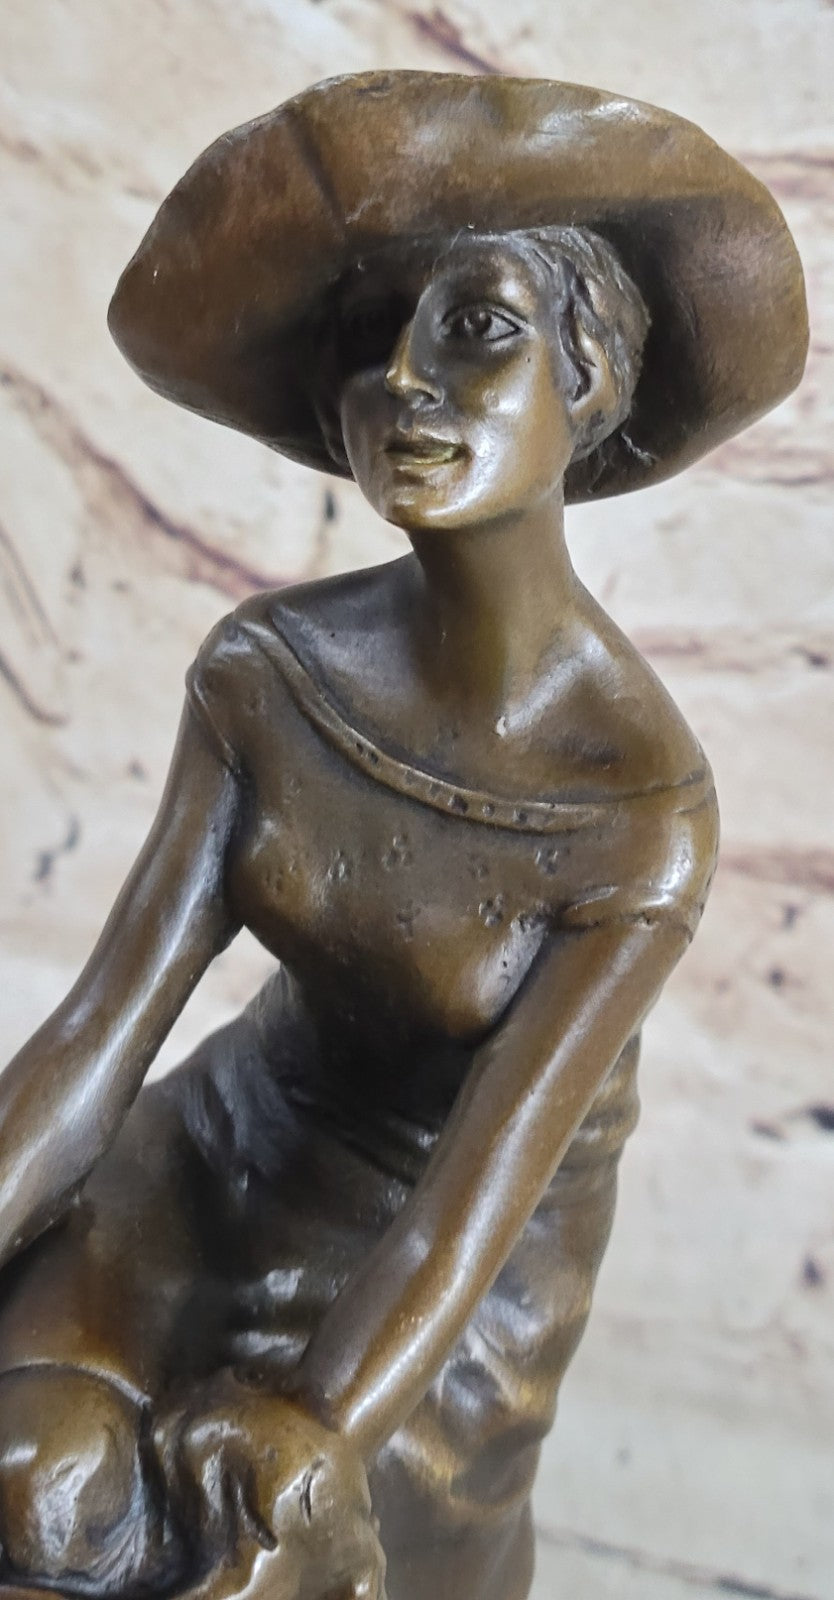 Woman Sits On Chair Handmade Bronze Museum Quality Classic Artwork Statue Figure